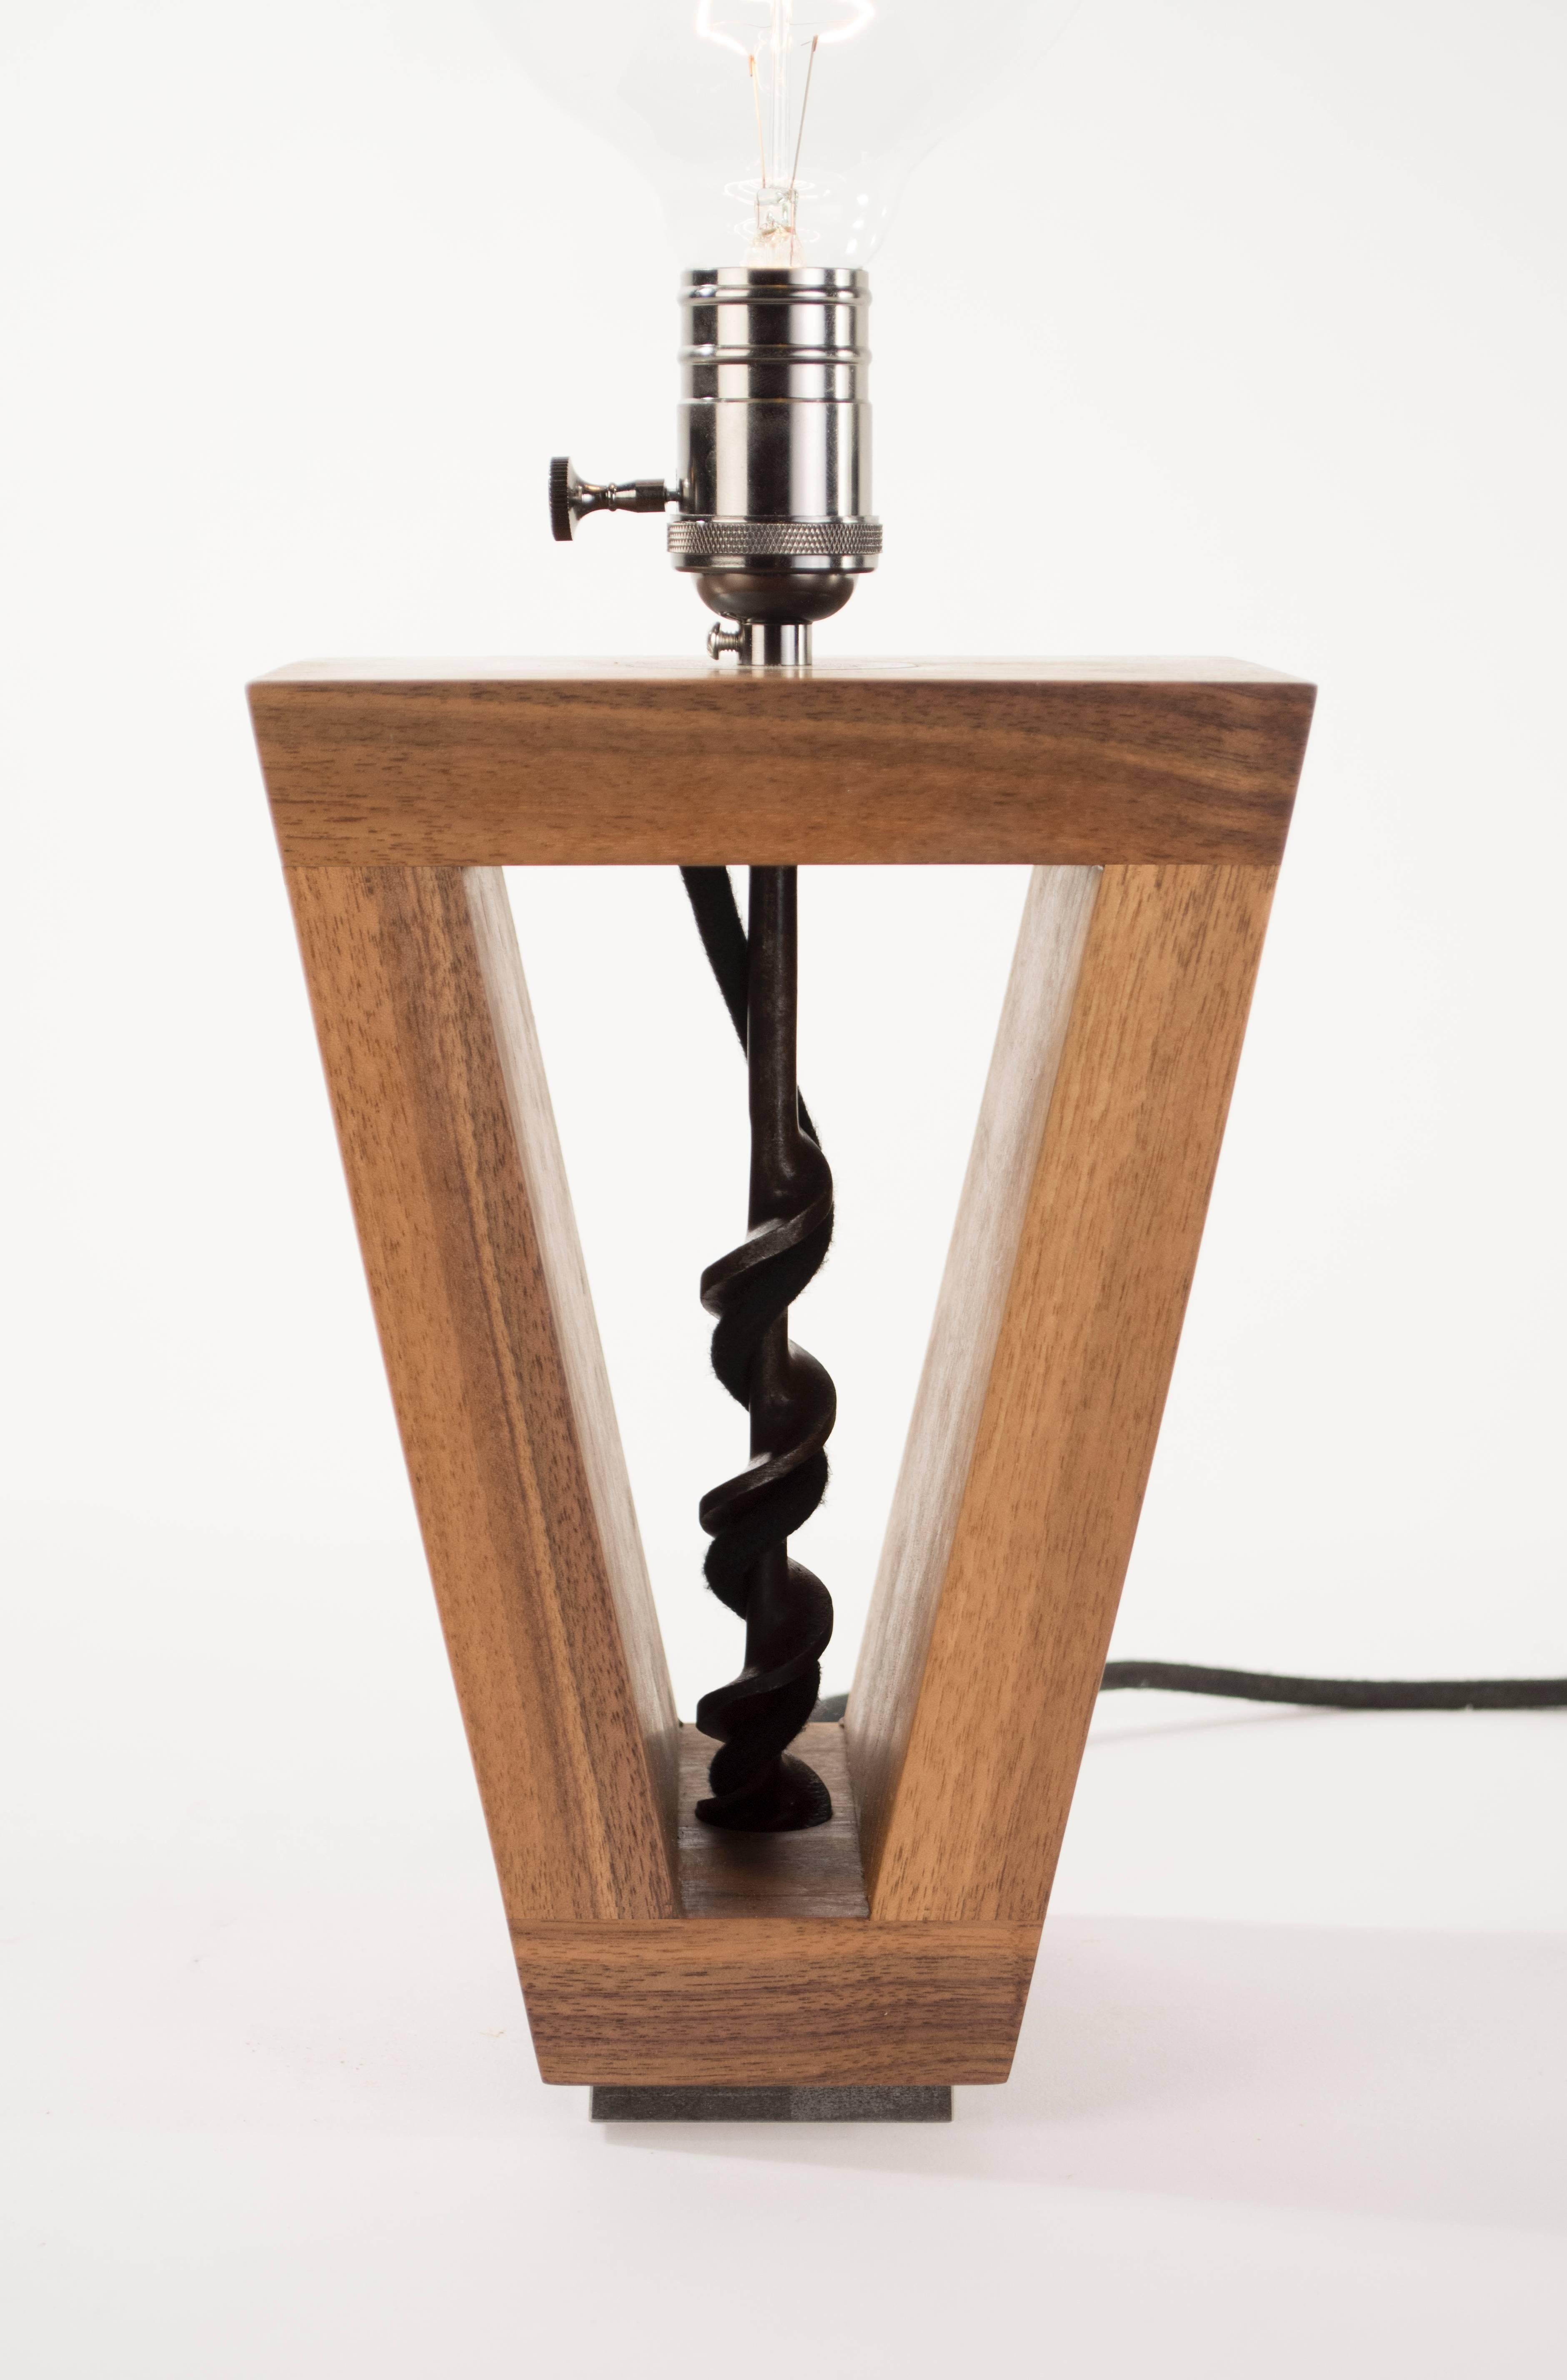 - black walnut - antique drill bit - cloth wrapped lamp cord - fully dimmable oil rubbed bronze fixture - tungsten bulbs. 
7 x 5 x 18 inches (L x W x H.)
Wired for 120 v outlets unless 220 v is requested, everything is made to order and is of the